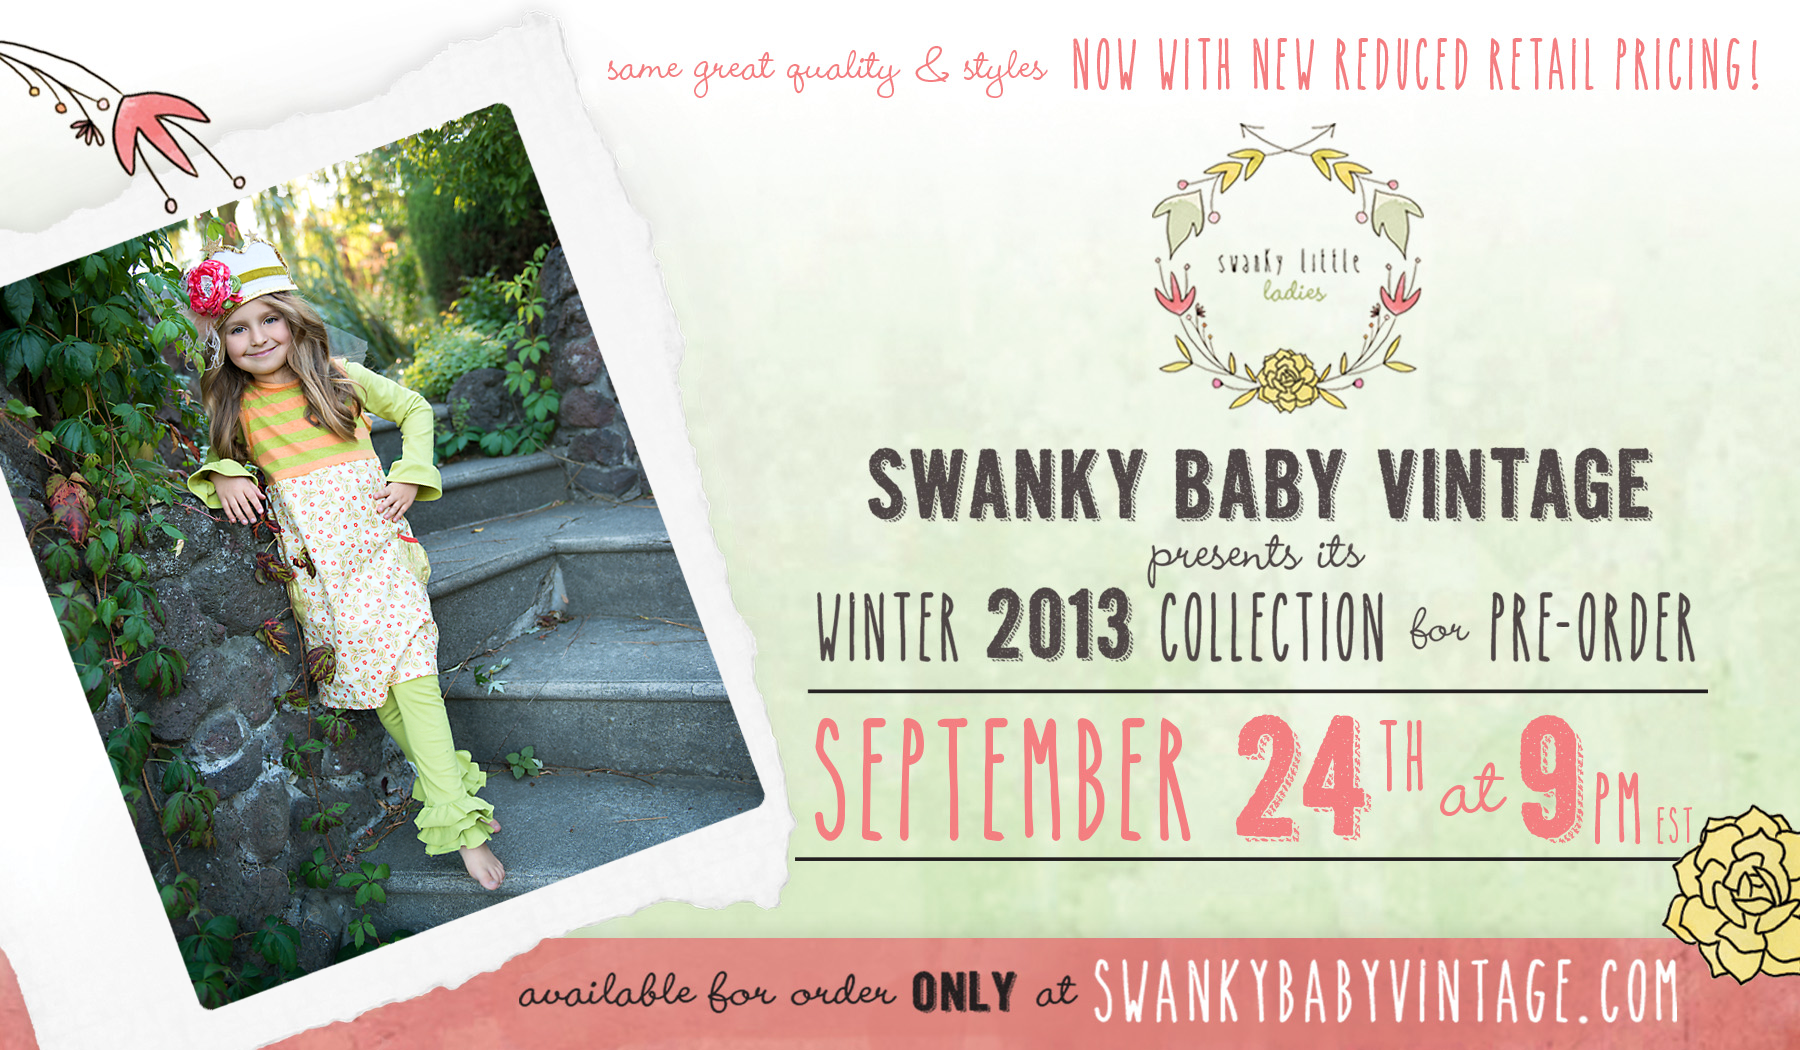 Swanky Baby Vintage, and Catching Violet Photography team up to launch their new line. SO cute!! You should check them outhttp://www.swankybabyvintageblog.com